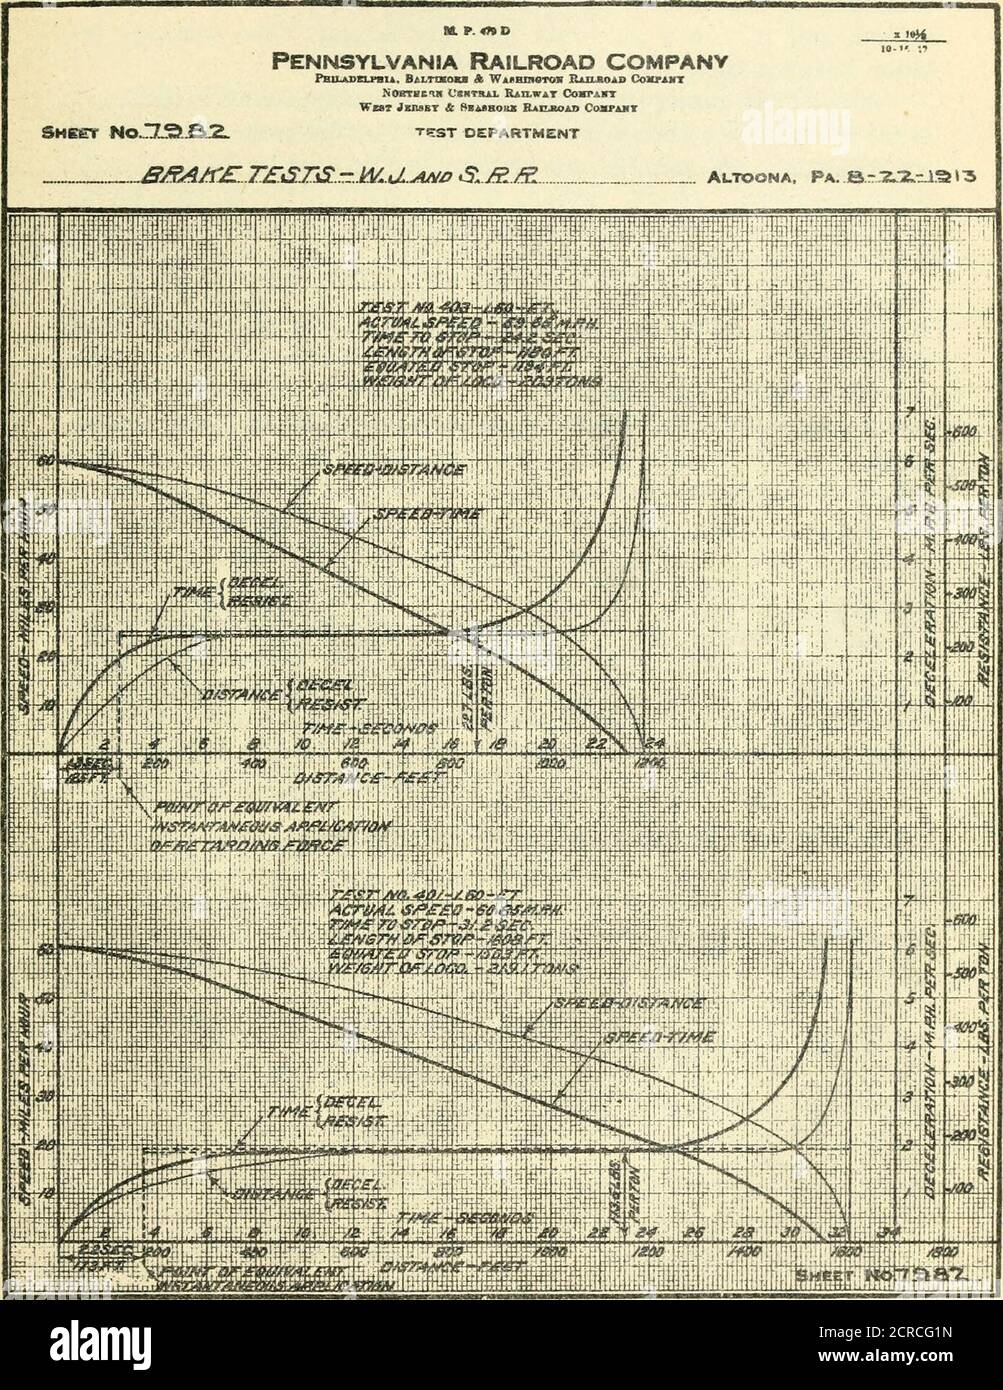 . Brake tests; a report of a series of road tests of brakes on passenger equipment cars made at Absecon, New Jersey, in 1913 . Fig. 140. SINGLE CAR BREAKAWAY STOPS. CHARACTERISTIC CURVE. These tests were similar to those shown in Fig. 138, except that in this case the car was fitted with flanged shoes. 232. Fig. 141. LOCOMOTIVE STOP.CHARACTERISTIC CURVE.When high braking power was used on the locomotive the stop from 60 m.p.h. was made In 1194 feet. Thelower portion of the diagram shows a test with ordinary braking power on the locomotive. The stopwas made in 1563 feet. 233 curves. This curve Stock Photo